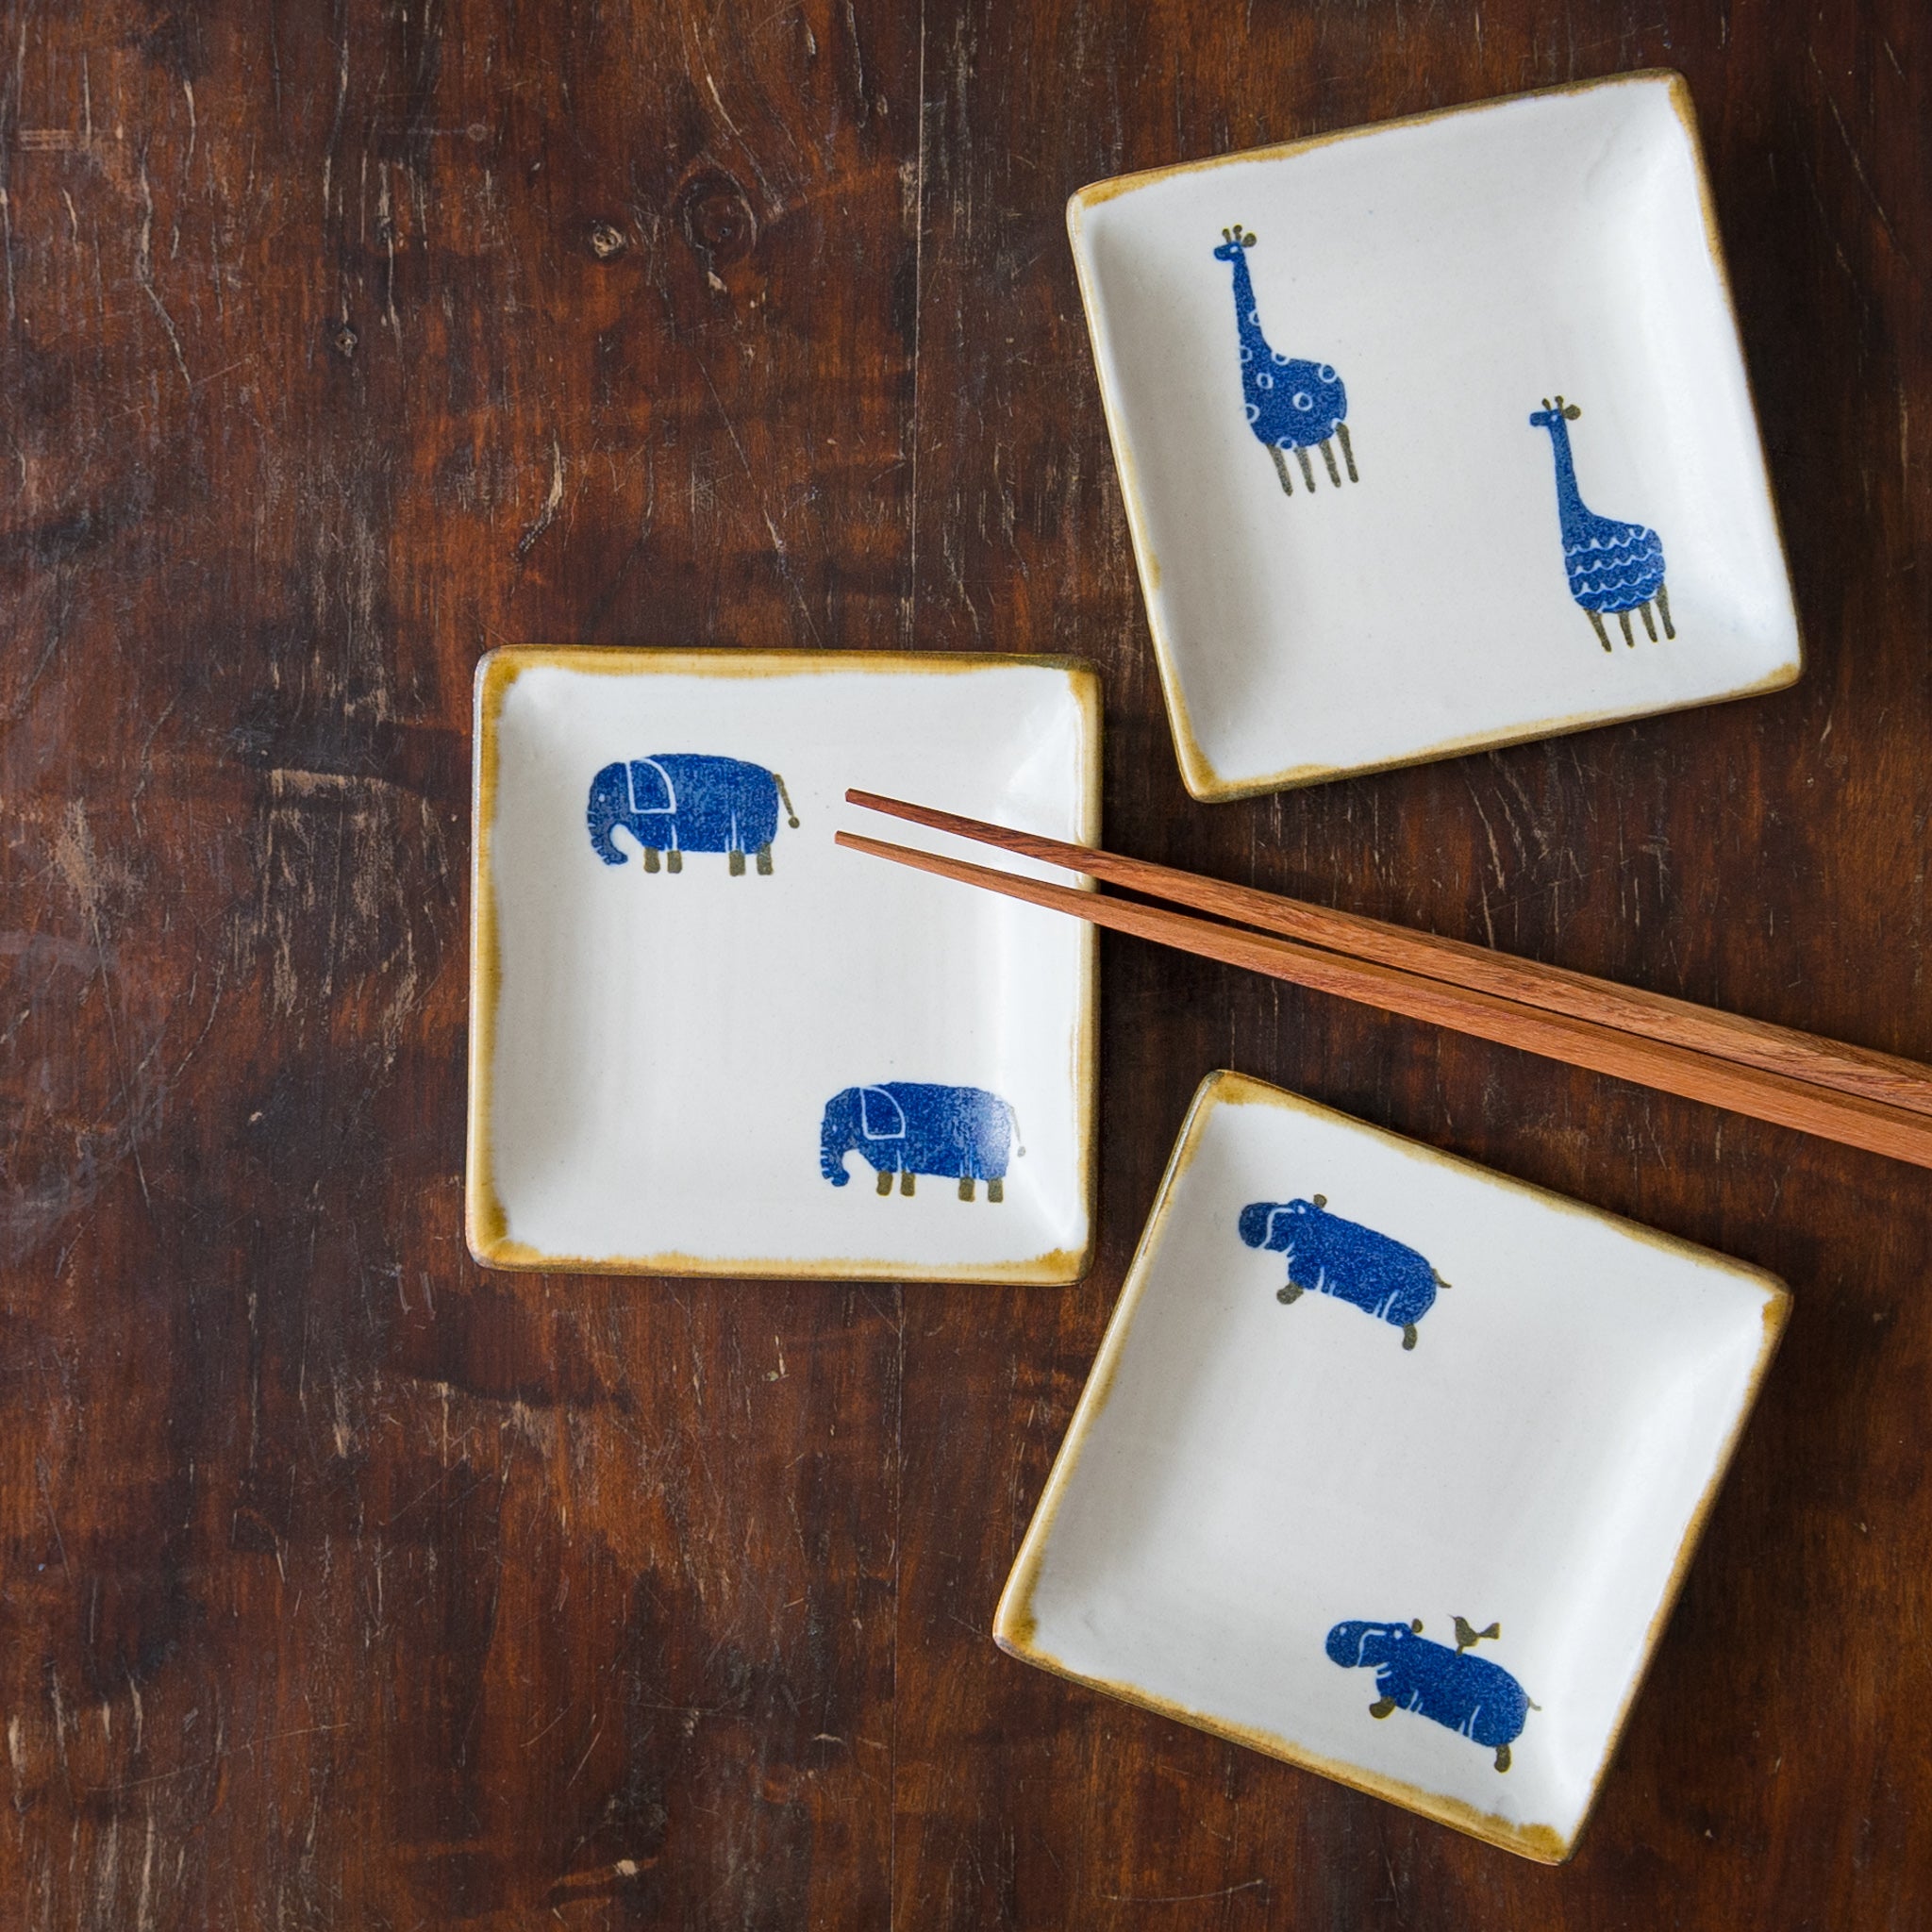 A corner small plate of the Japanese paper dyed animal series of Yasumi Koubou that brightens up the dining table.